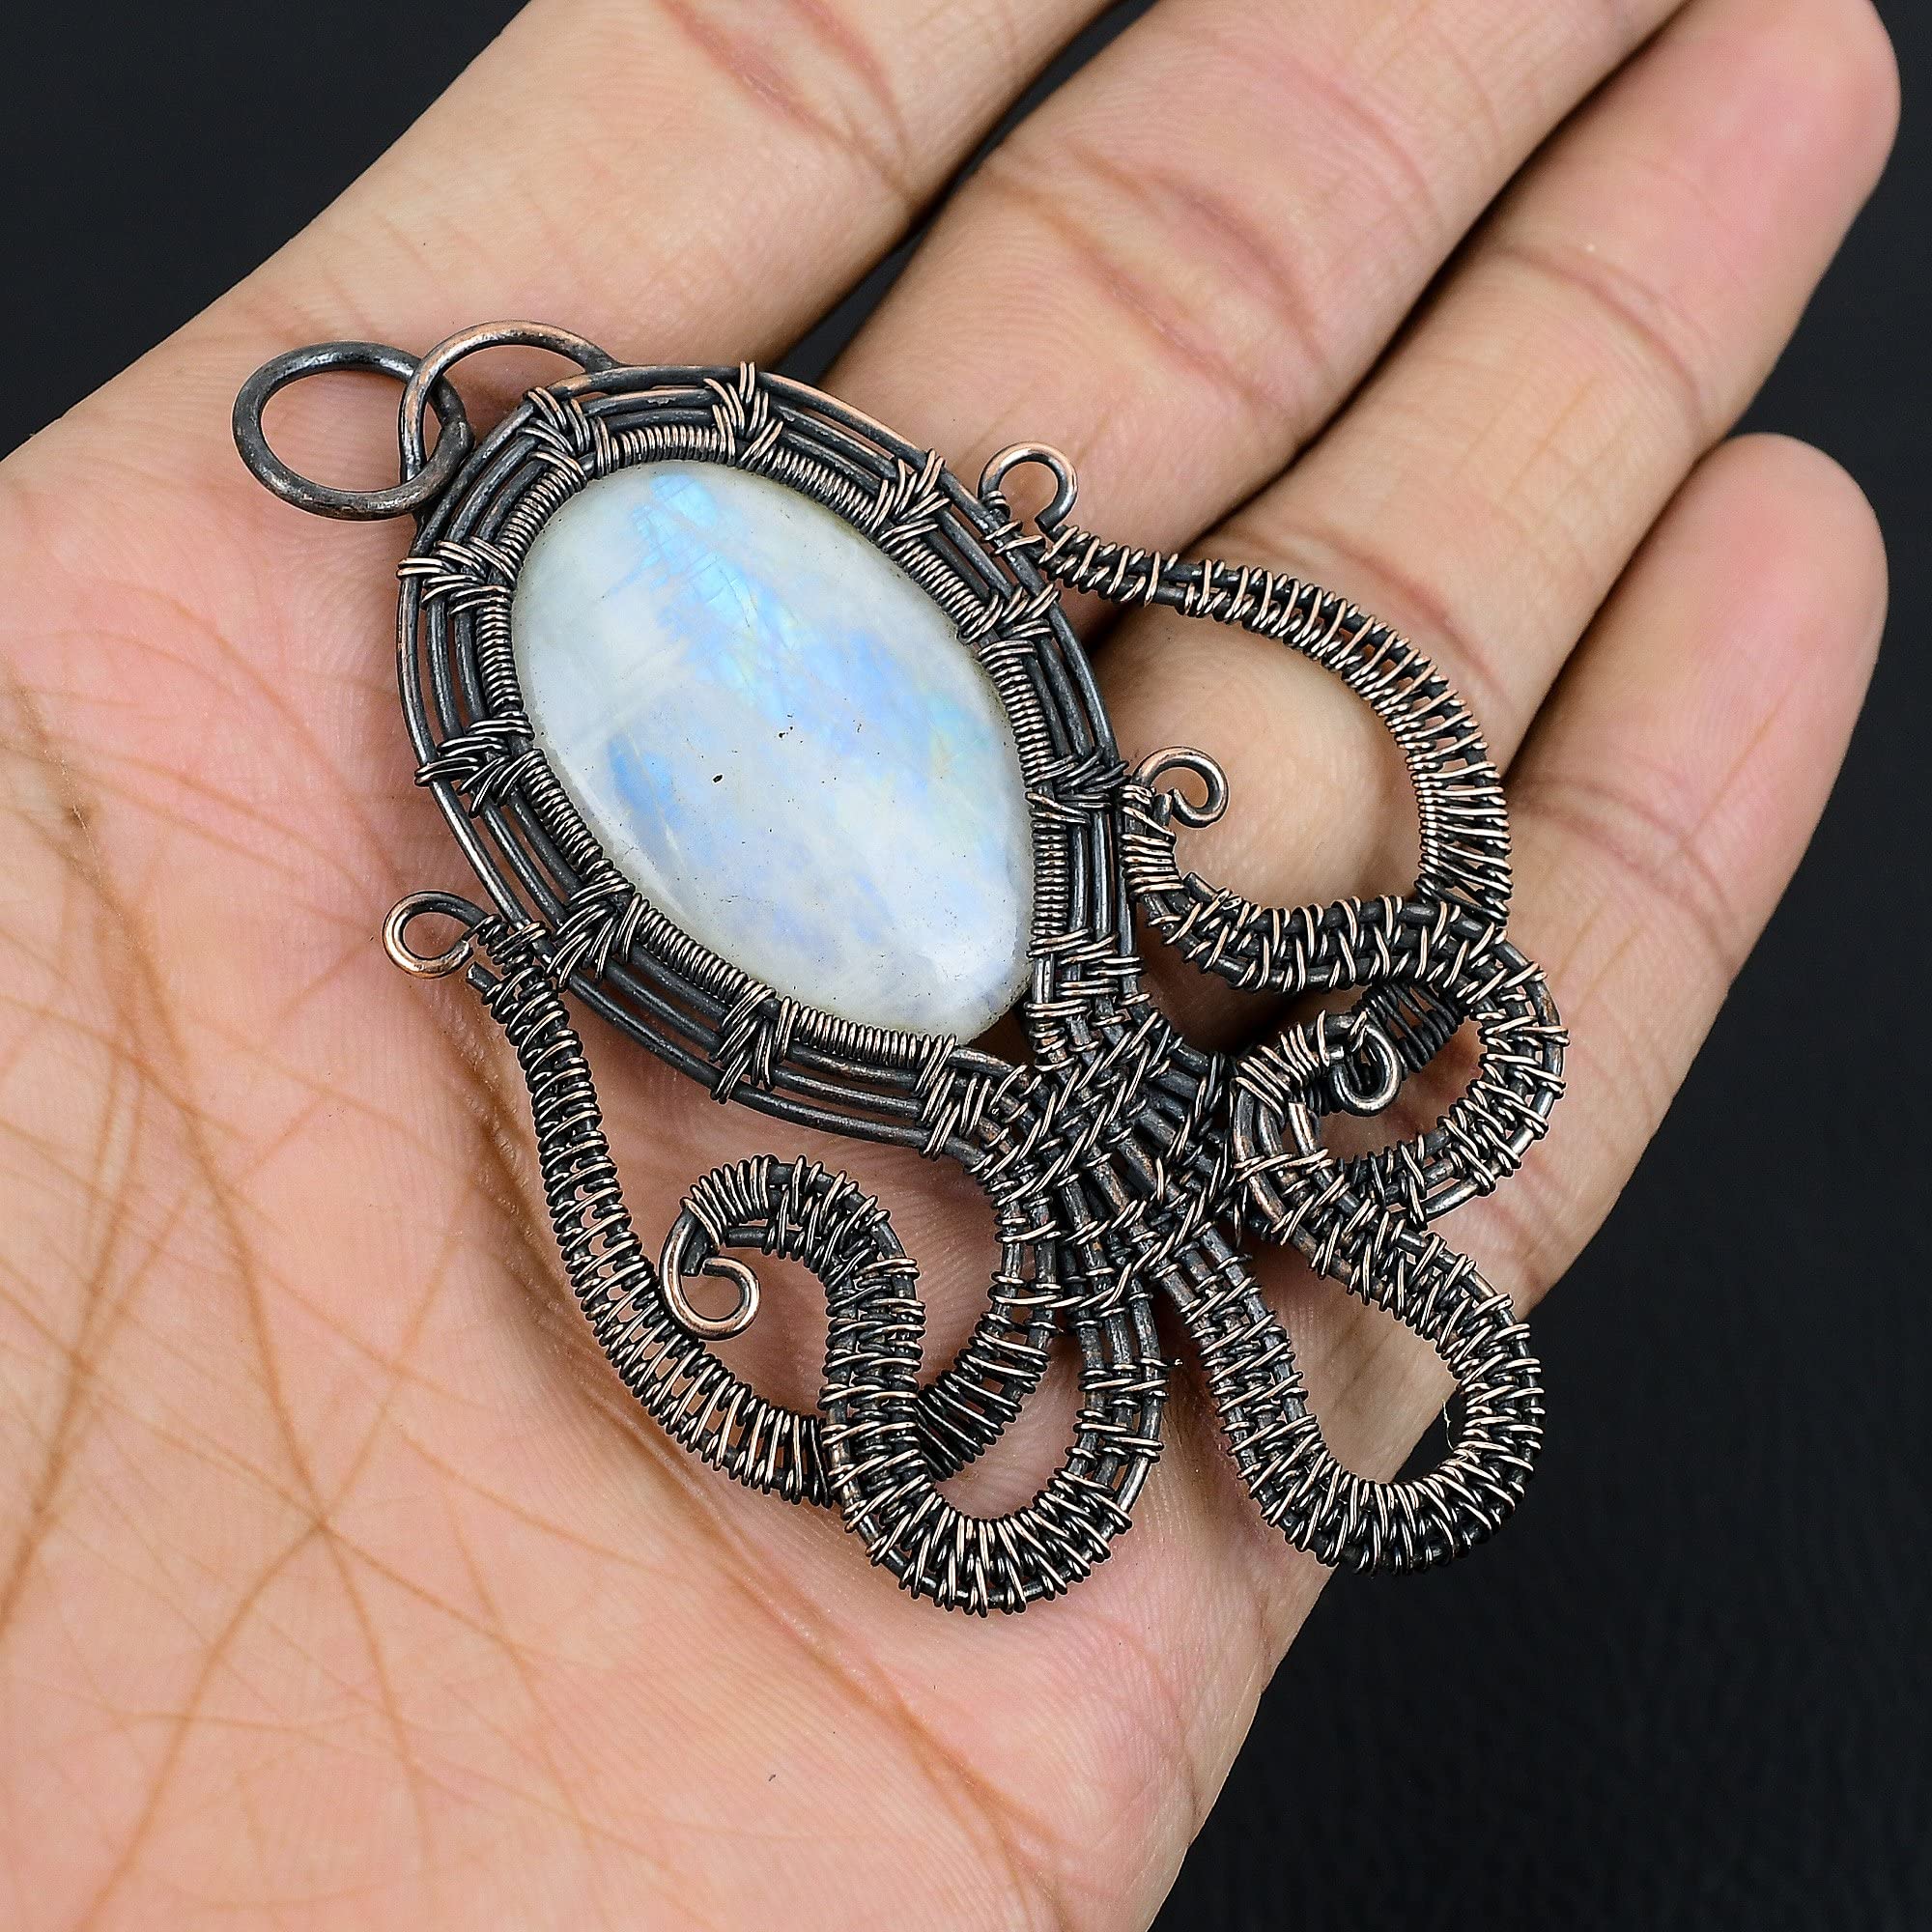 Unleash Your Inner Mermaid with Our Copper Wire Handmade Octopus-Shaped Labradorite Pendant Necklace - 20